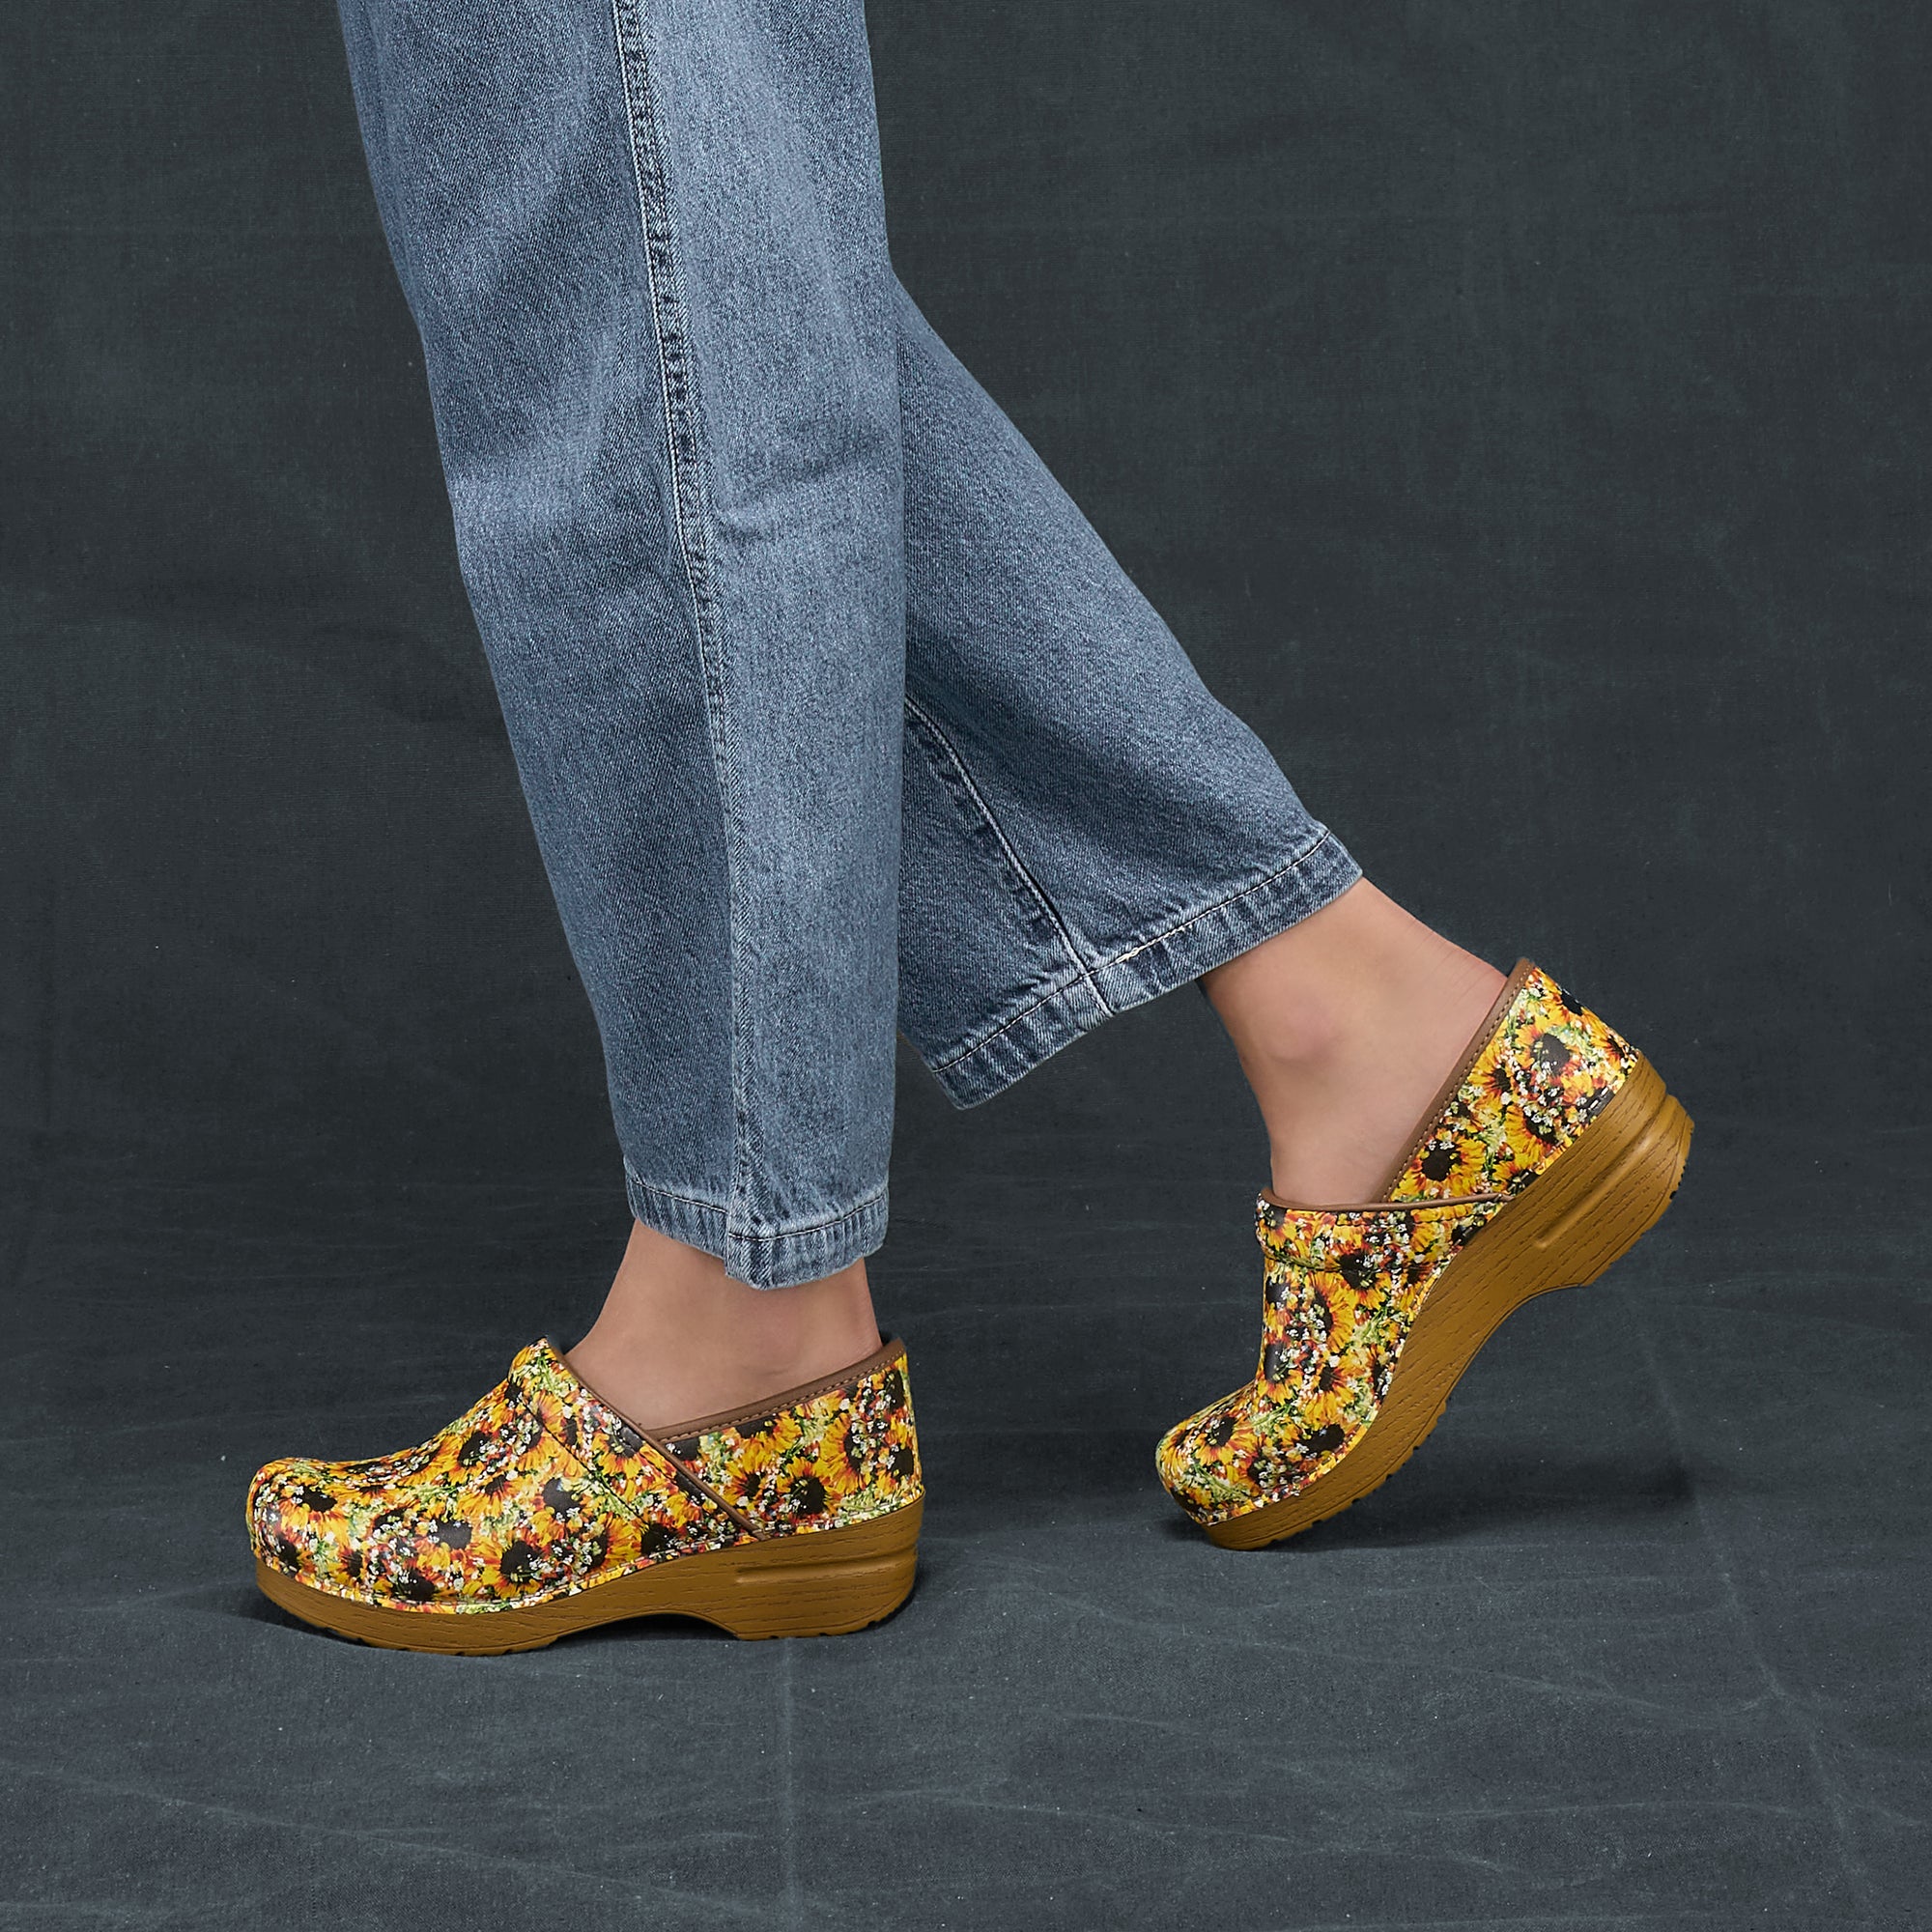 A side view of sunflower leather clogs with a faux leather sole.